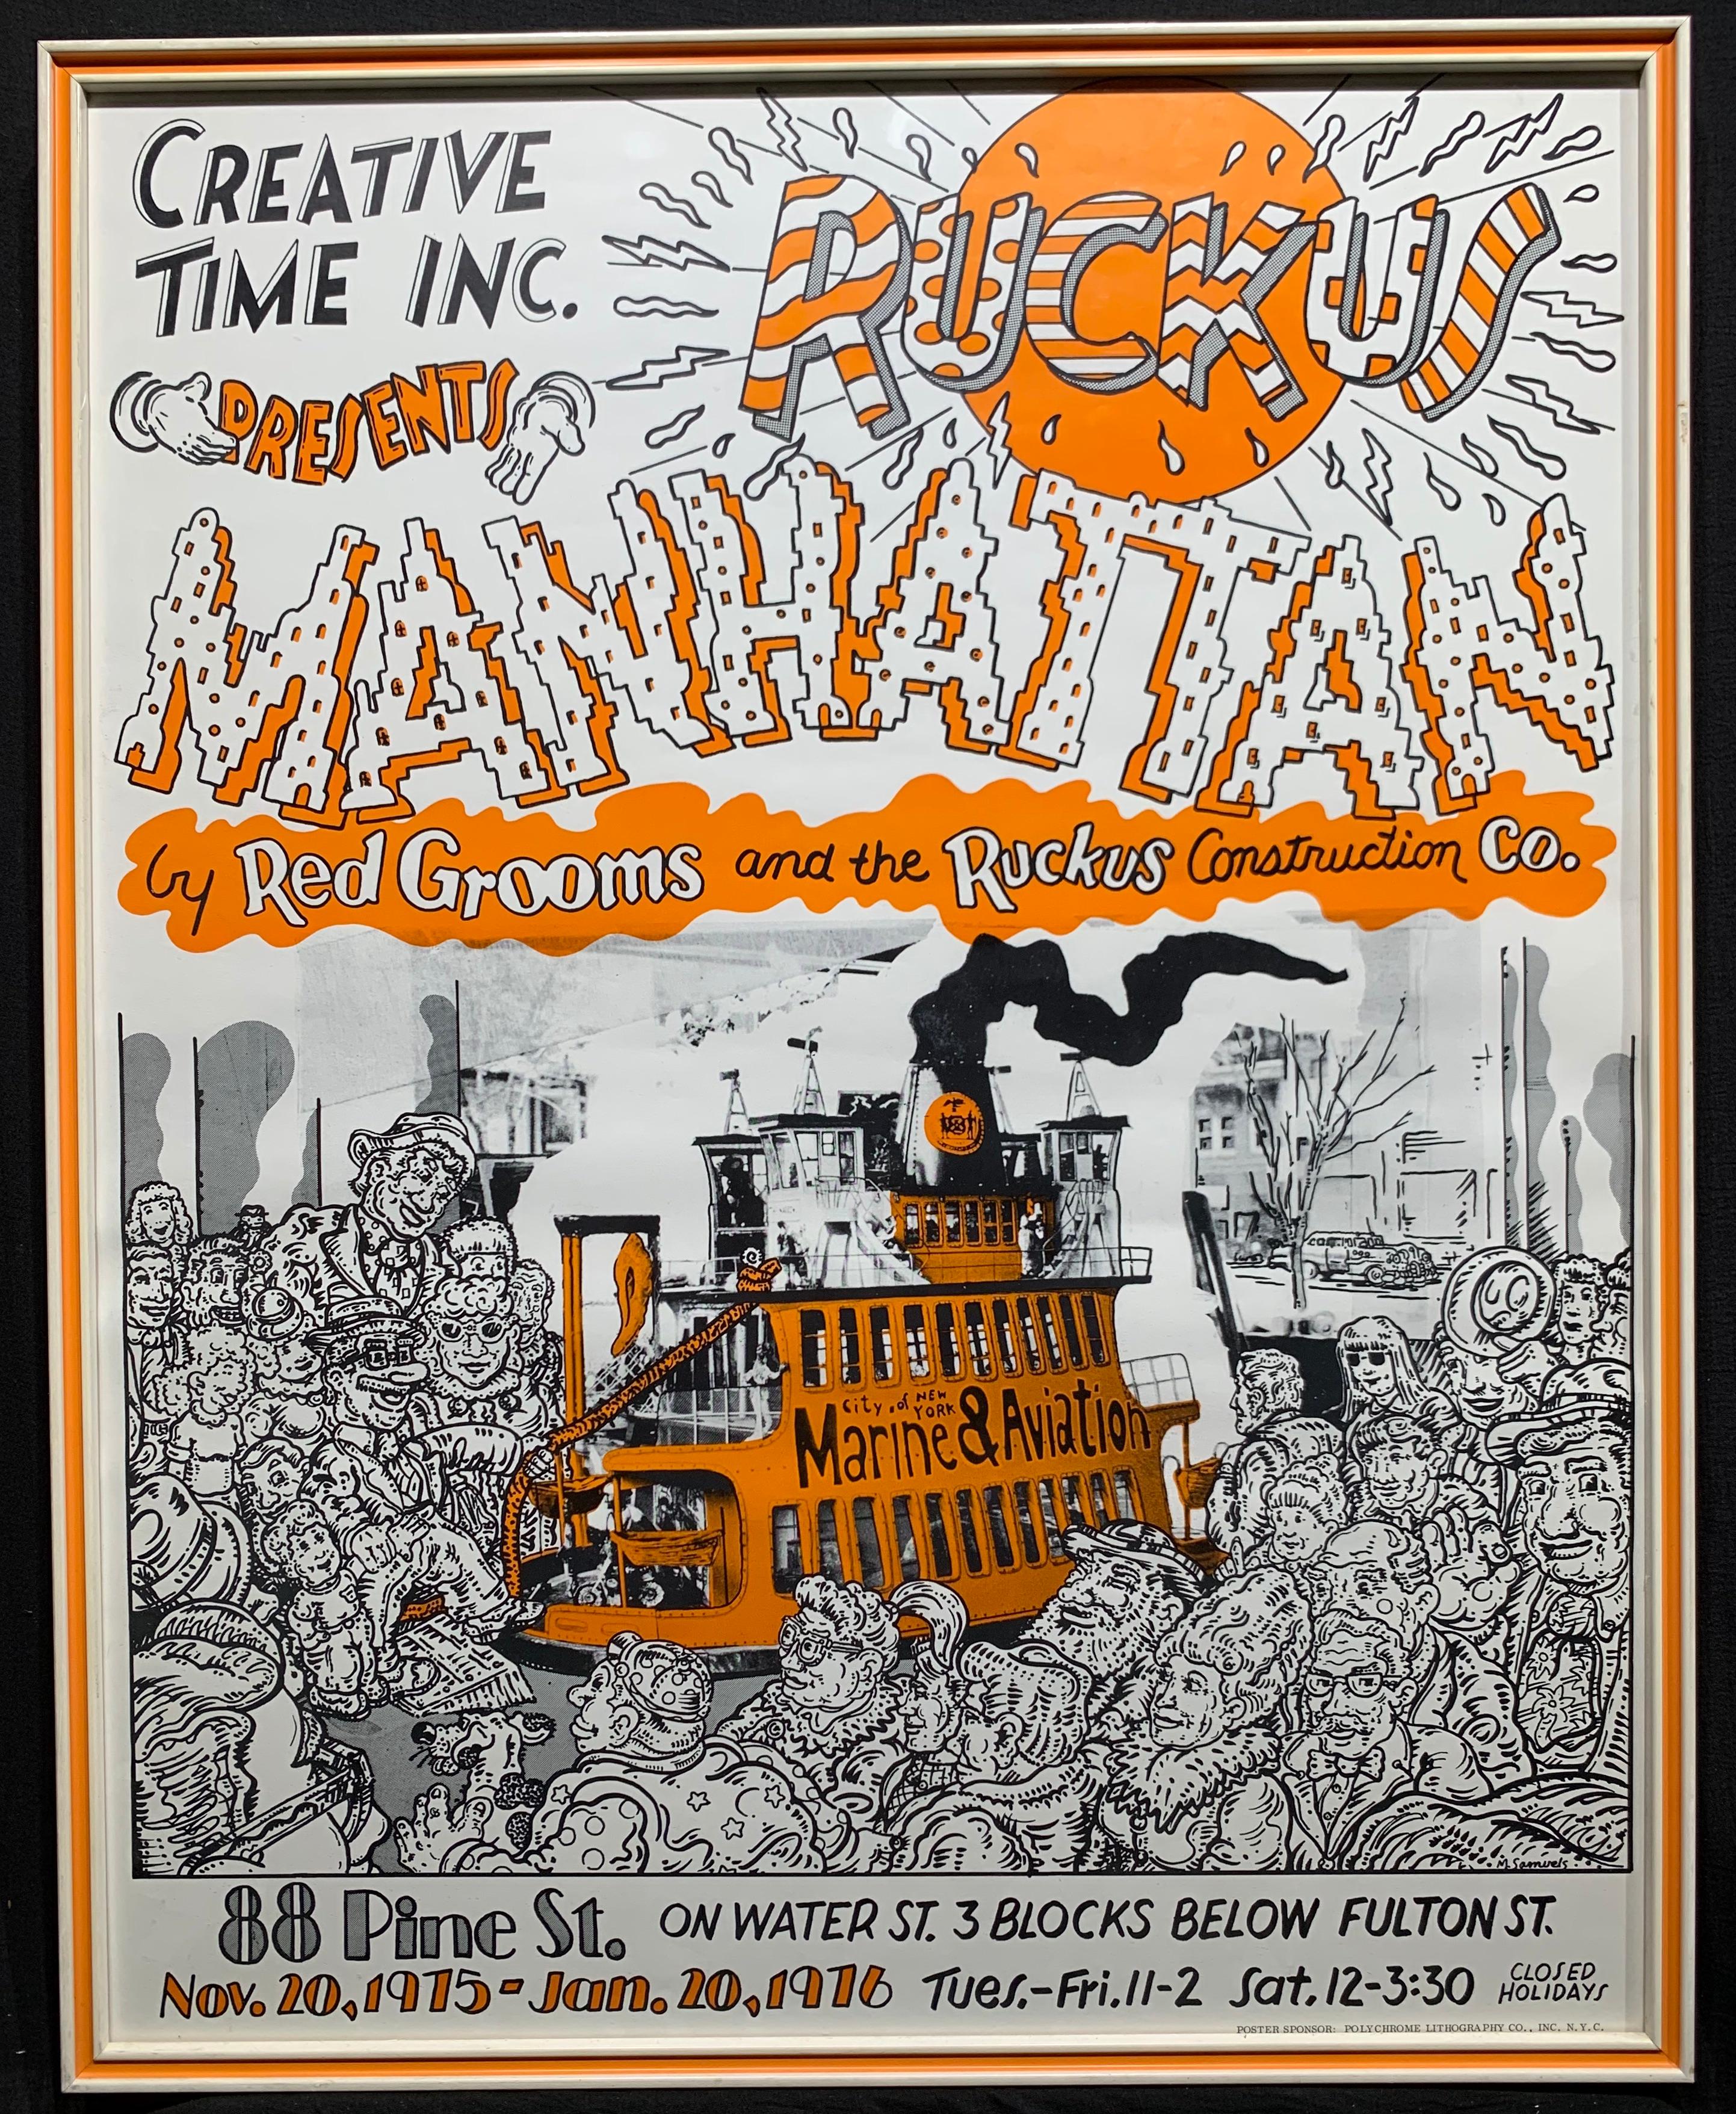 Creative Time Inc. Red Grooms exhibition poster